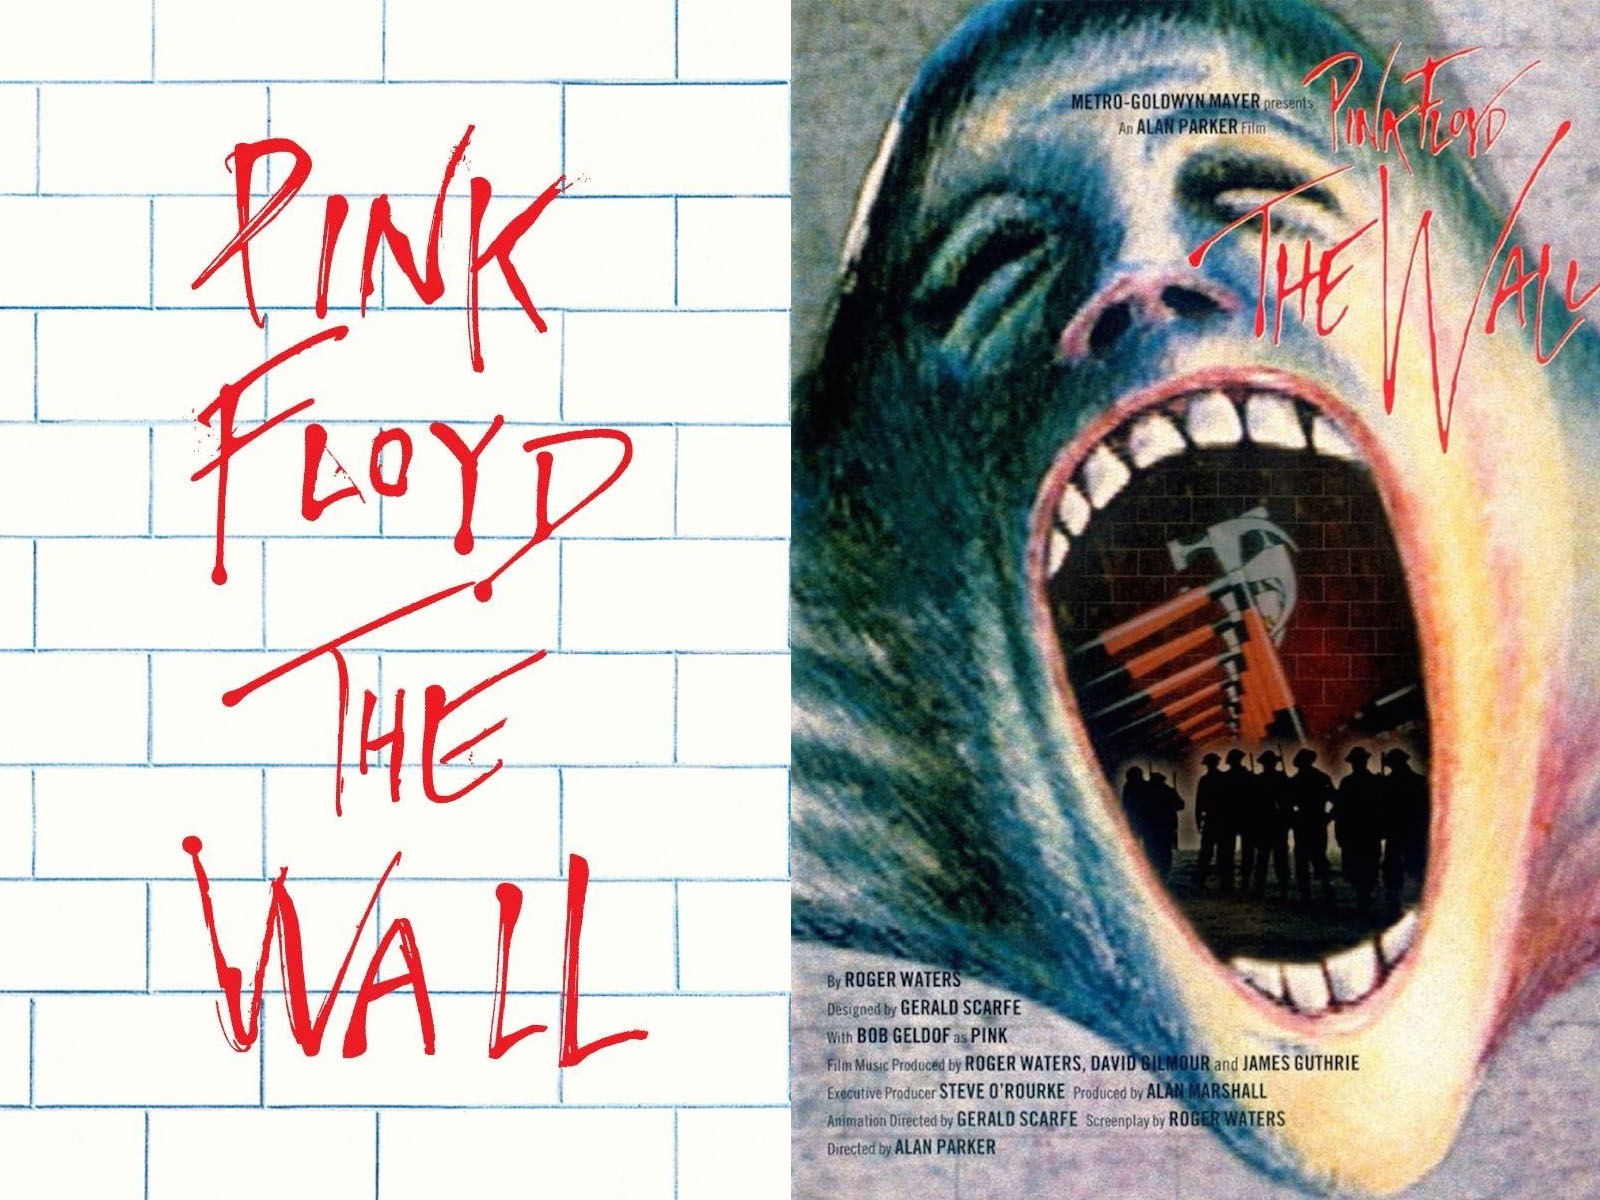 PINK FLOYD – THE WALL